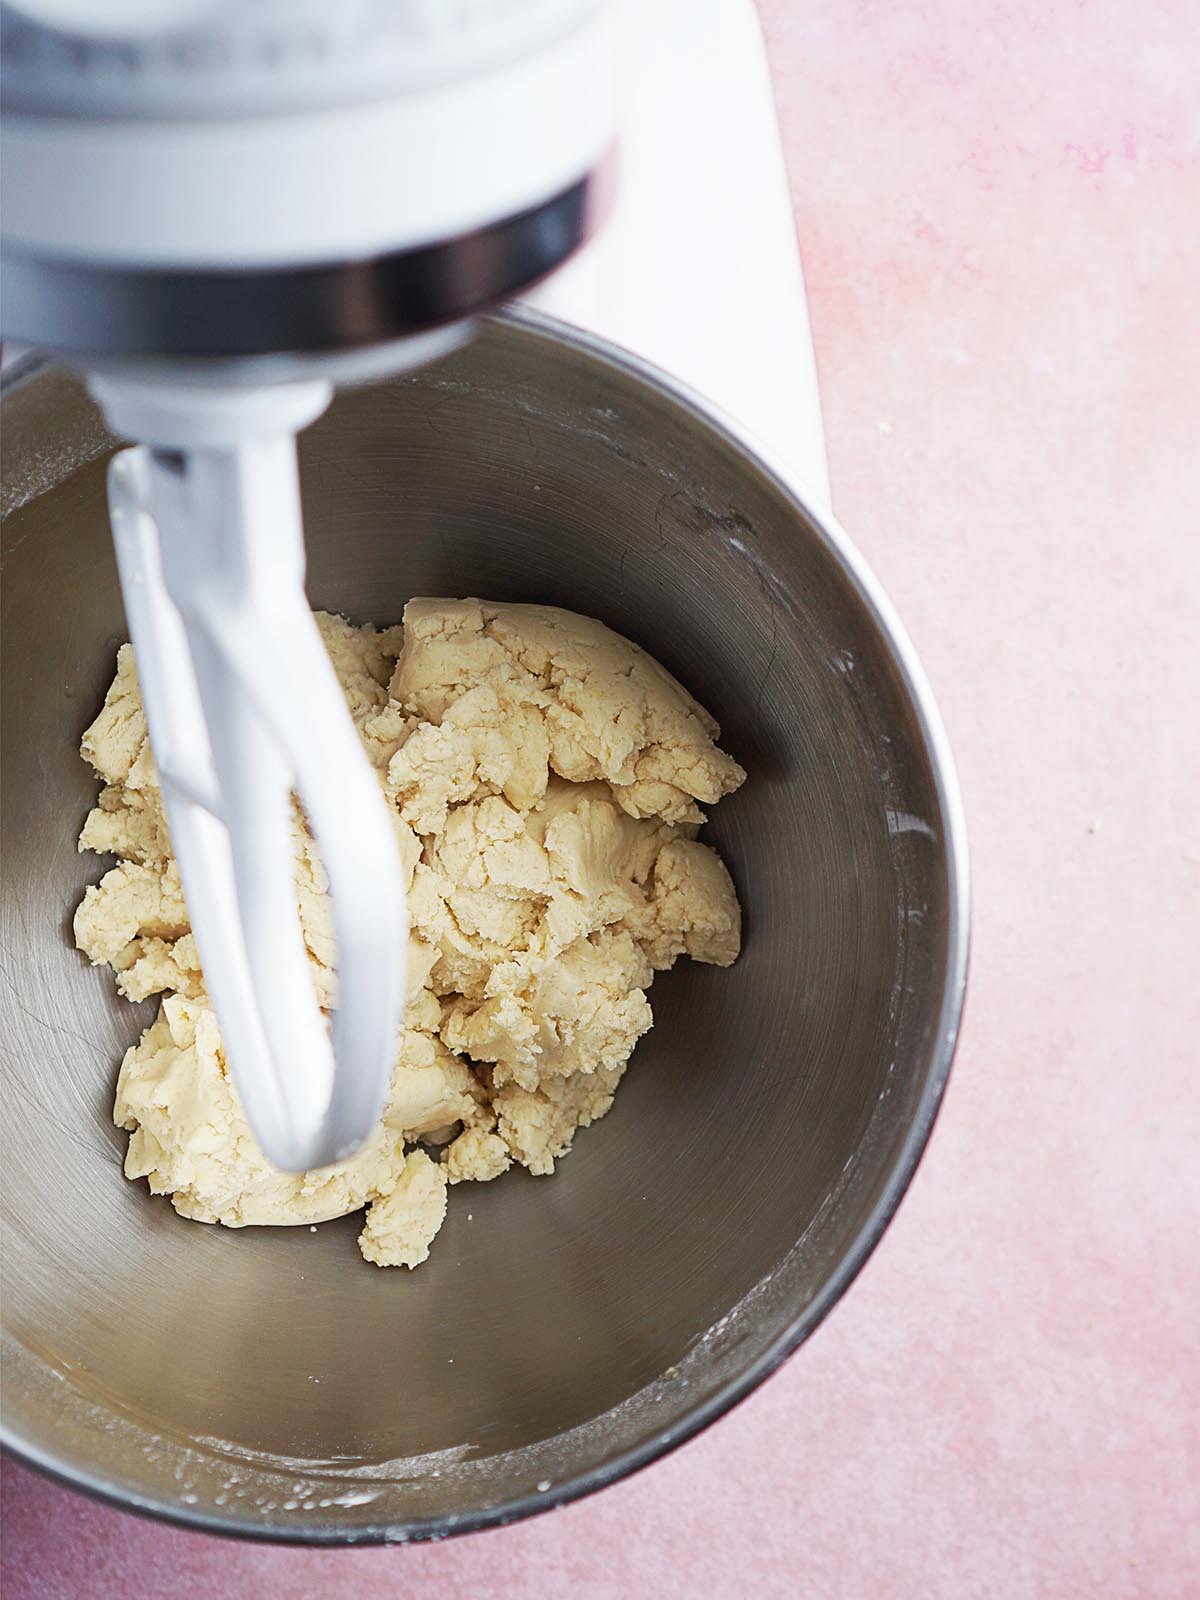 Making cookie dough in a stand mixer.